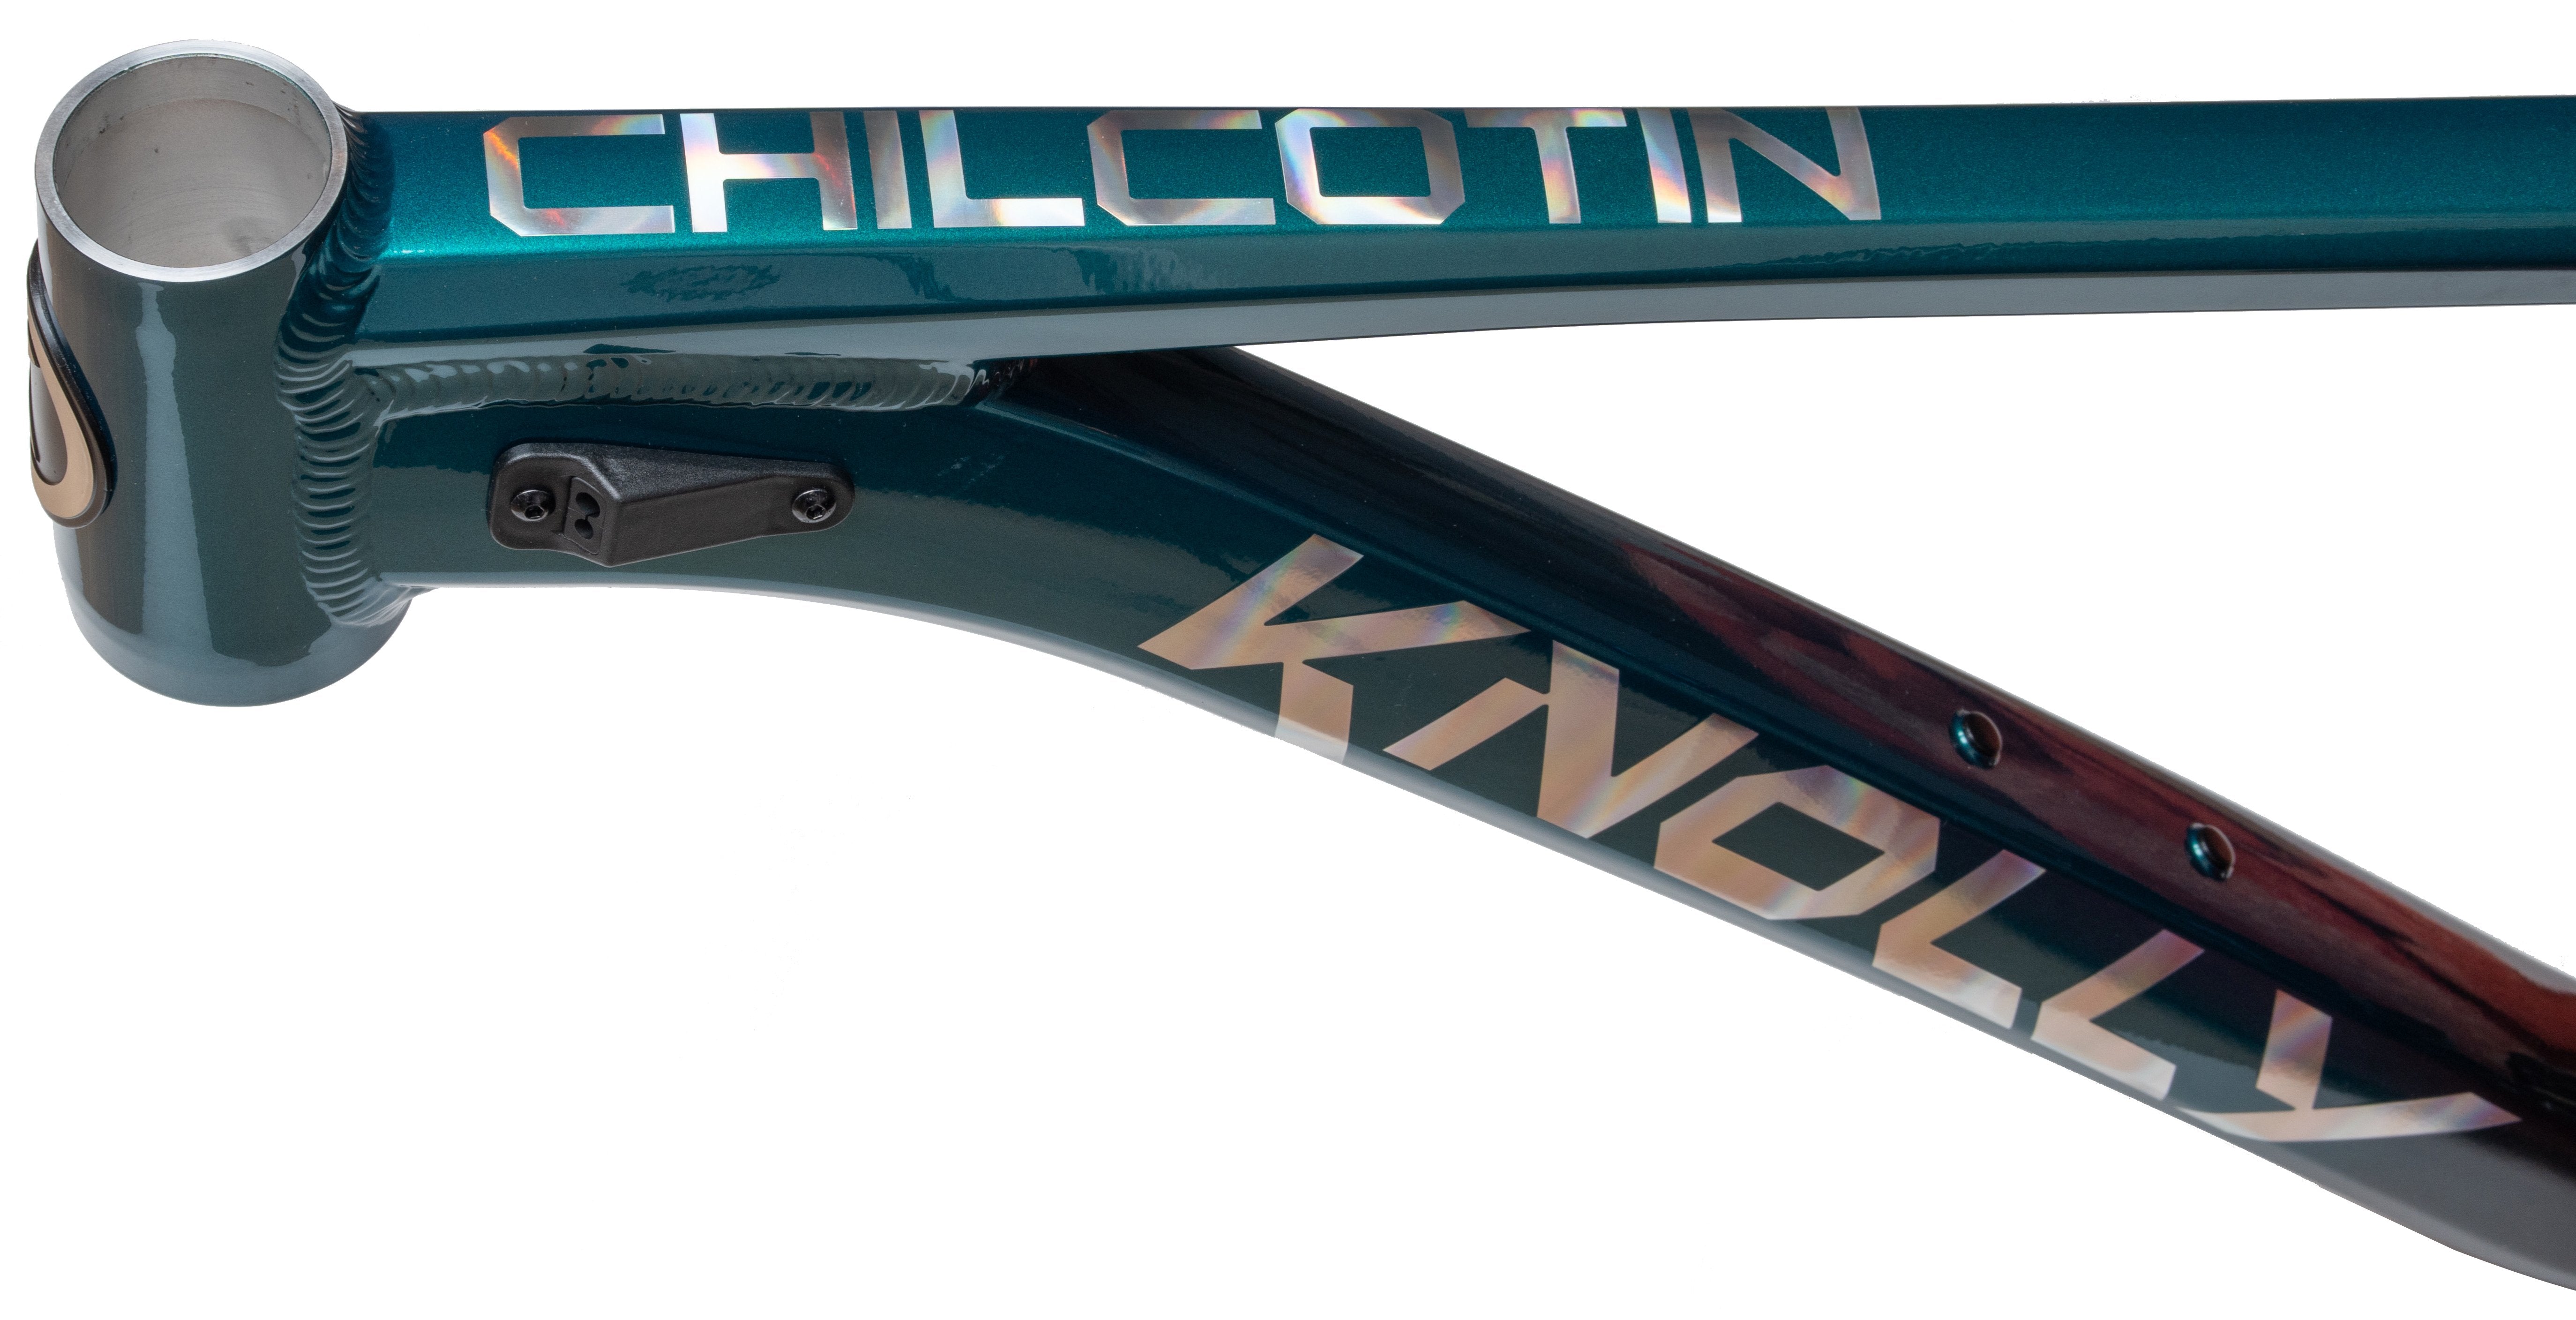 The New Chilcotin has Dropped!